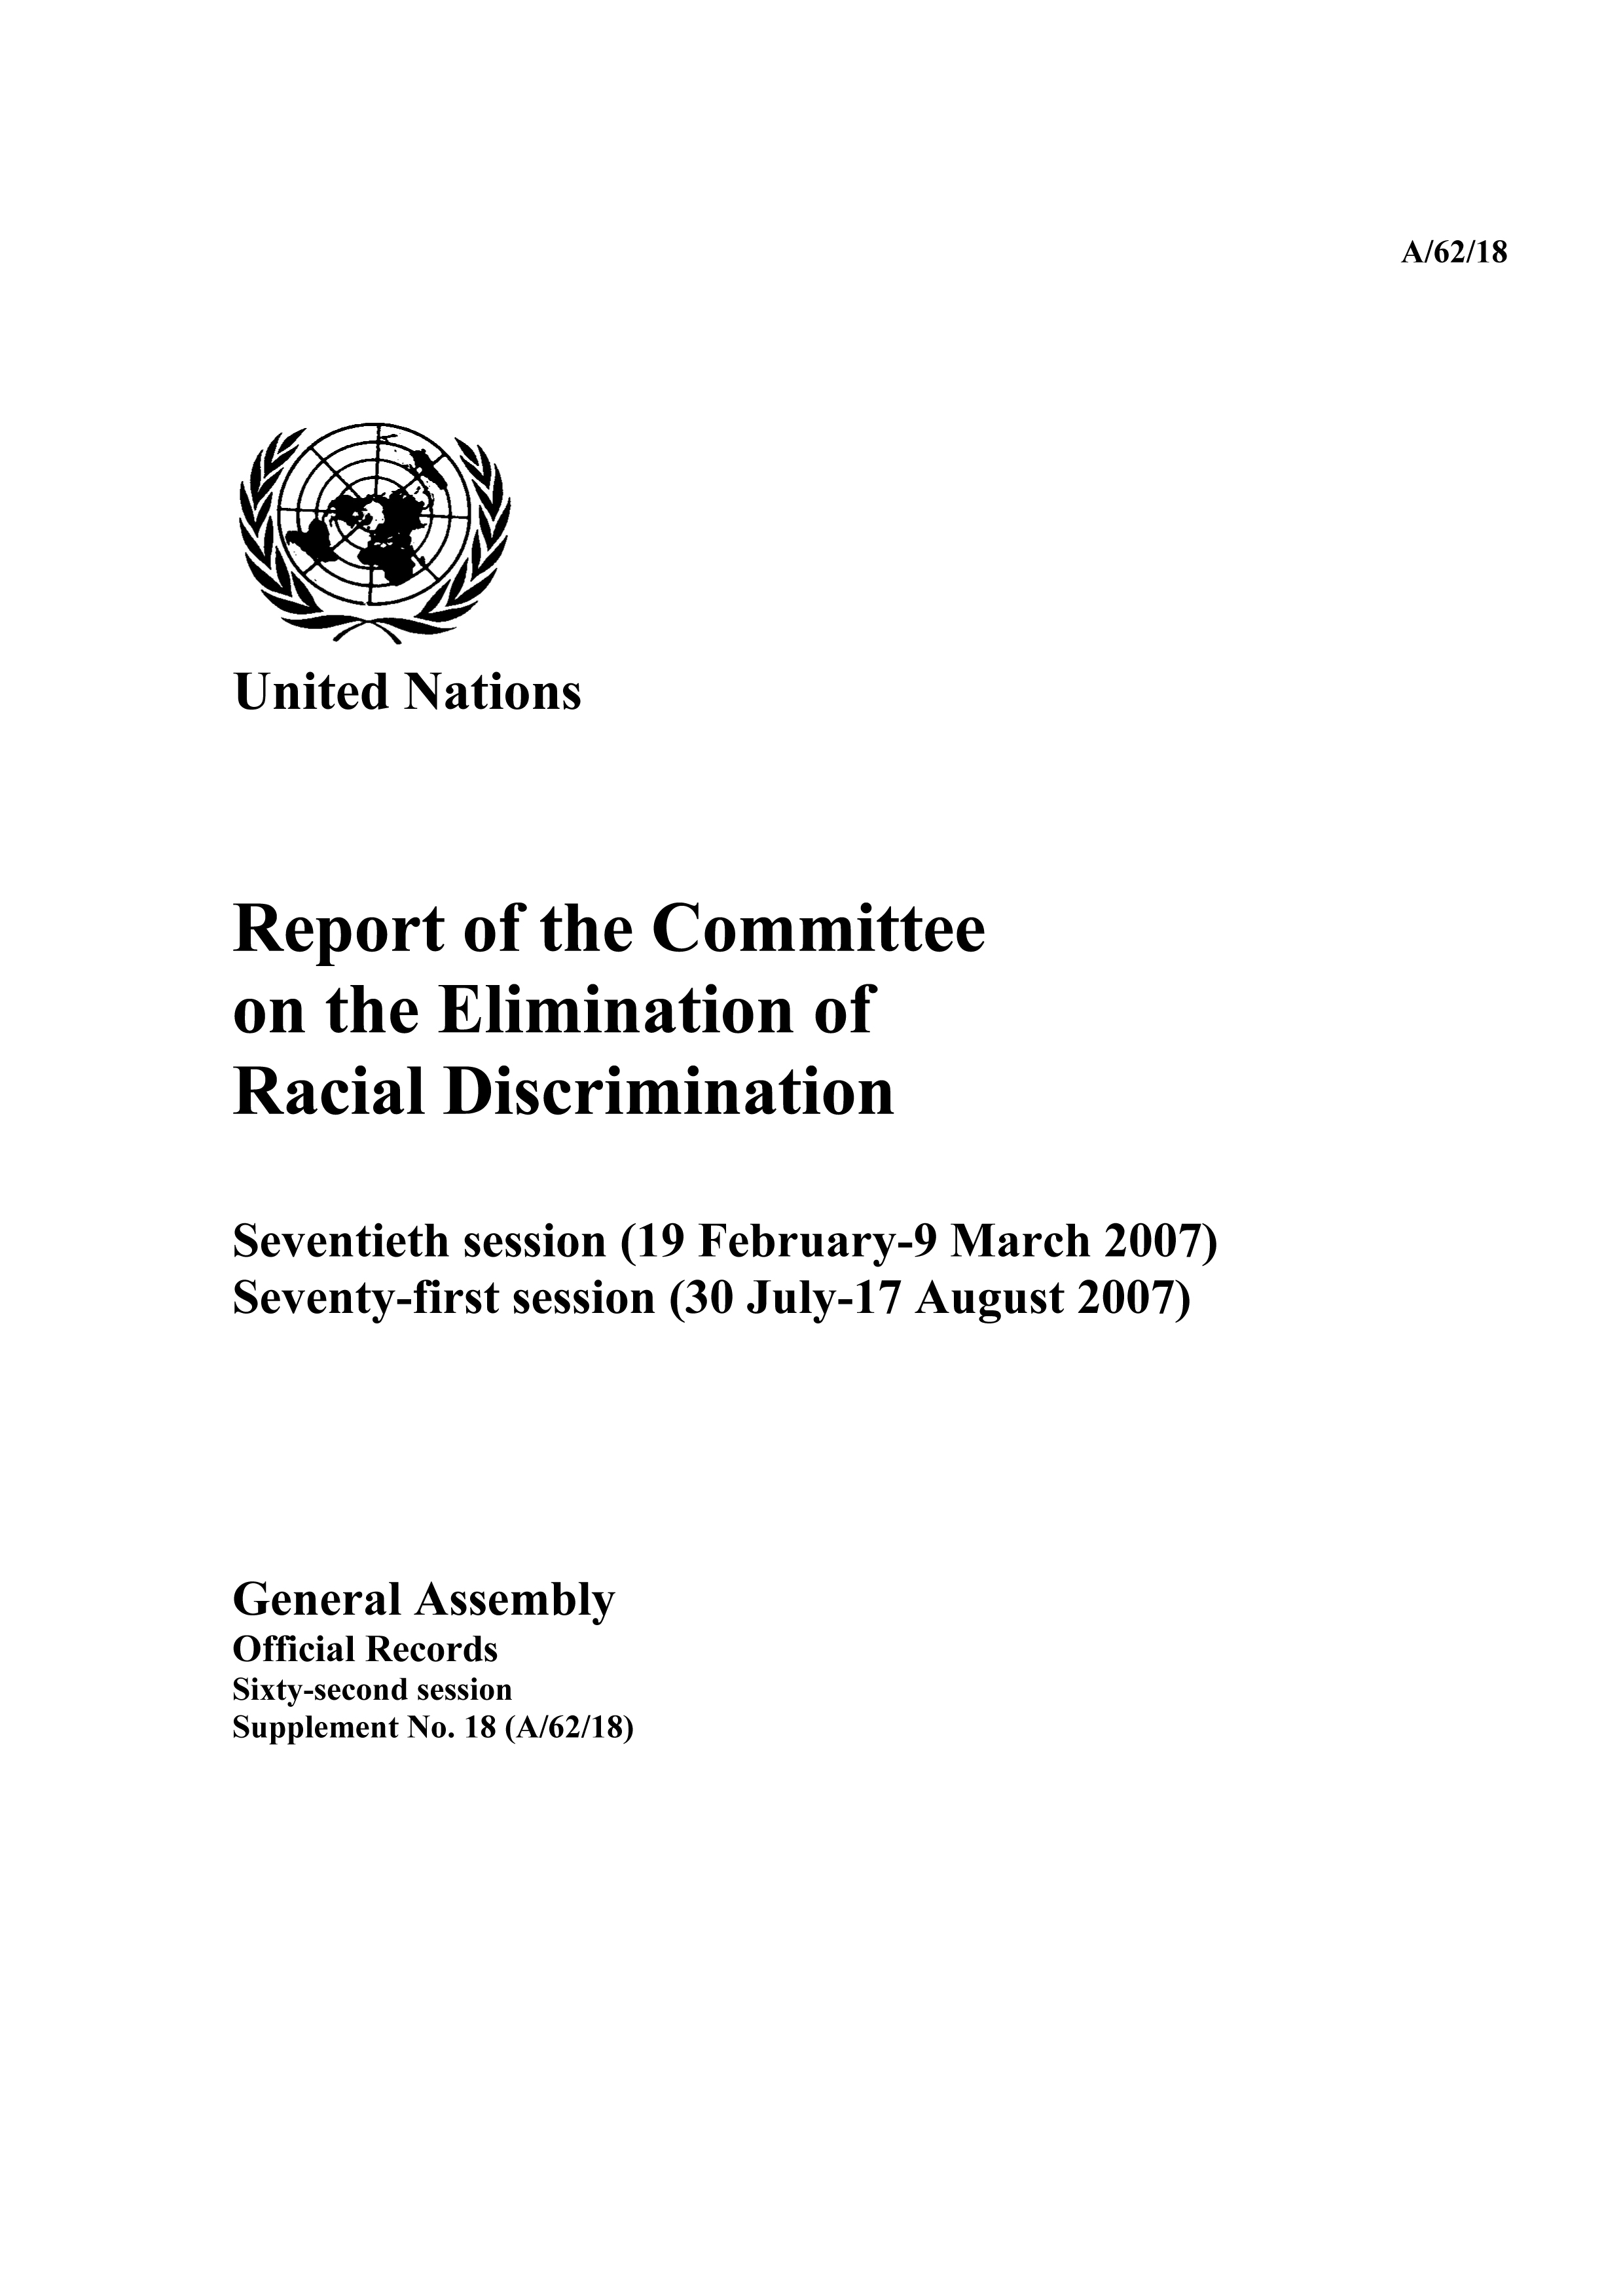 image of Prevention of racial discrimination, including early warning and urgent procedures